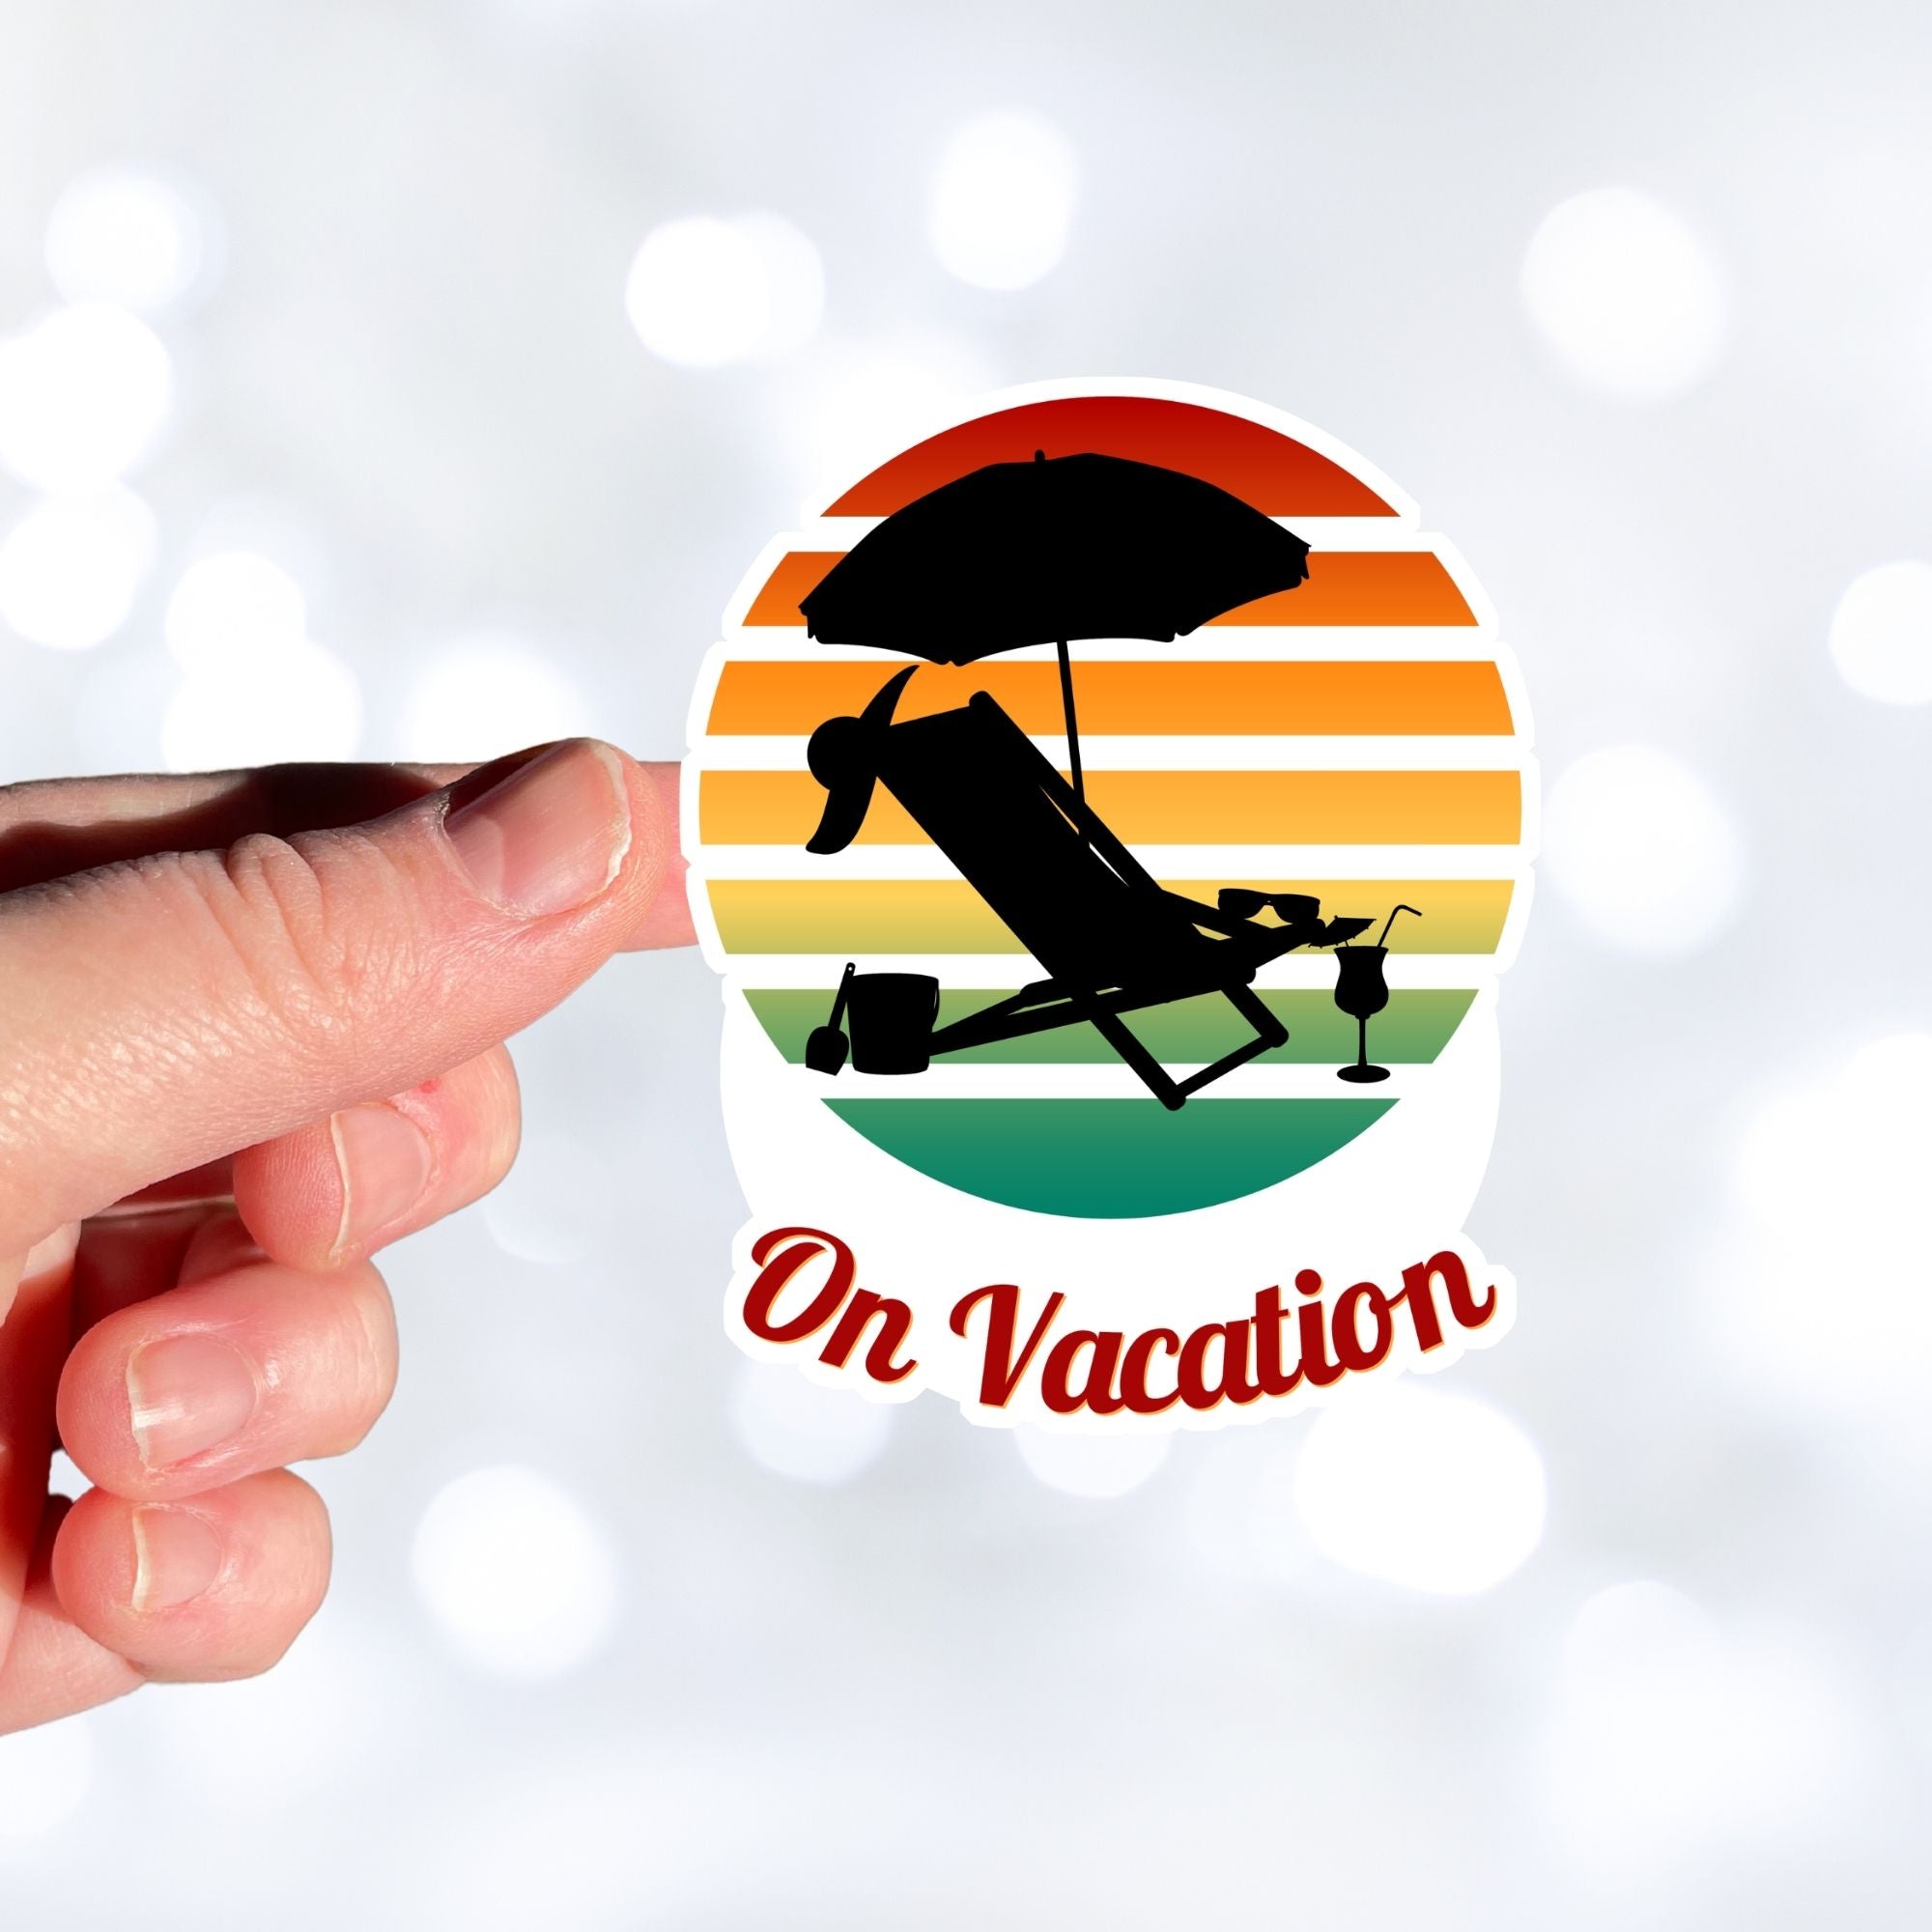 Who doesn't want to be on vacation? Whether you travel or just stay around home, being on vacation sure beats the alternative! This individual die-cut sticker features the silhouette of a beach chair and umbrella with a cool tropical beverage easily at hand, all on a colored gradient background. Relax, you're On Vacation! This image shows a hand holding the On Vacation sticker.